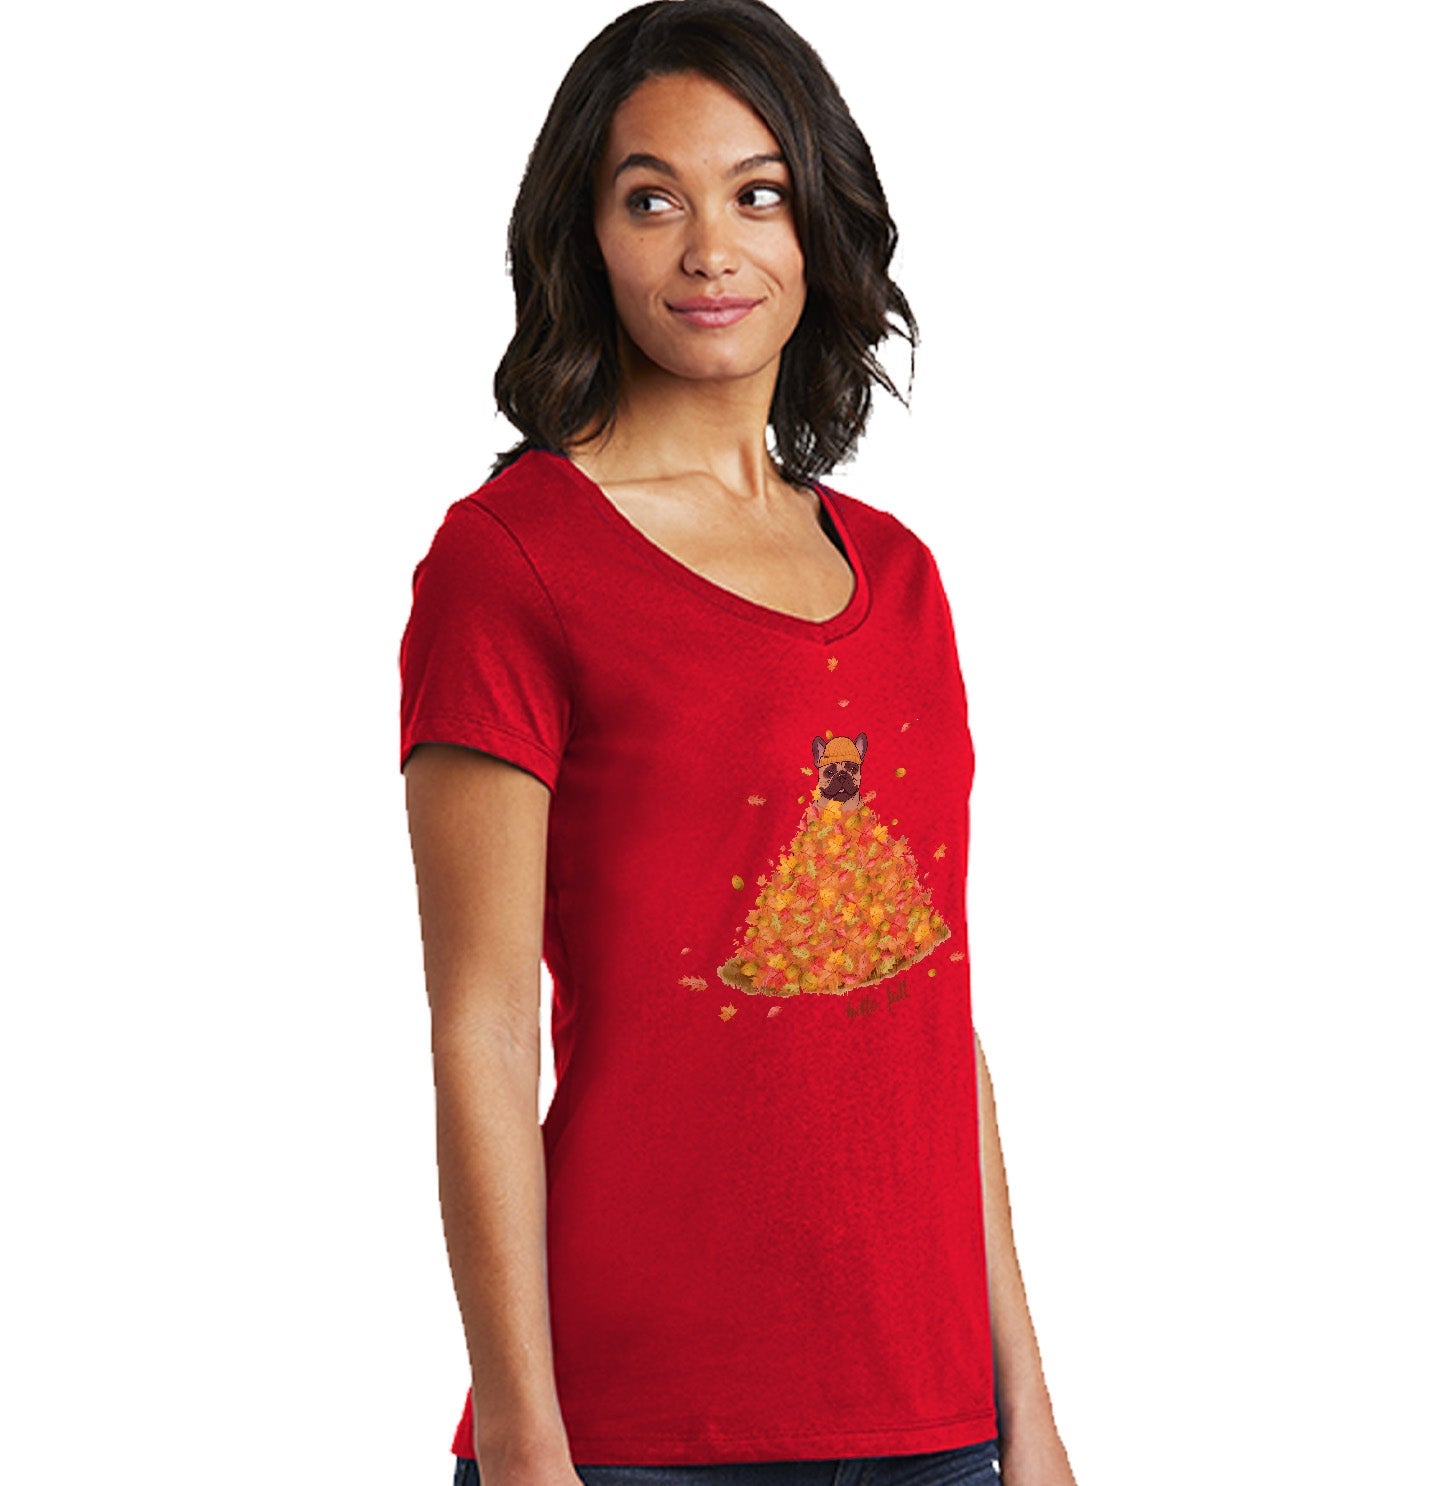 Leaf Pile and Frenchie - Women's V-Neck T-Shirt